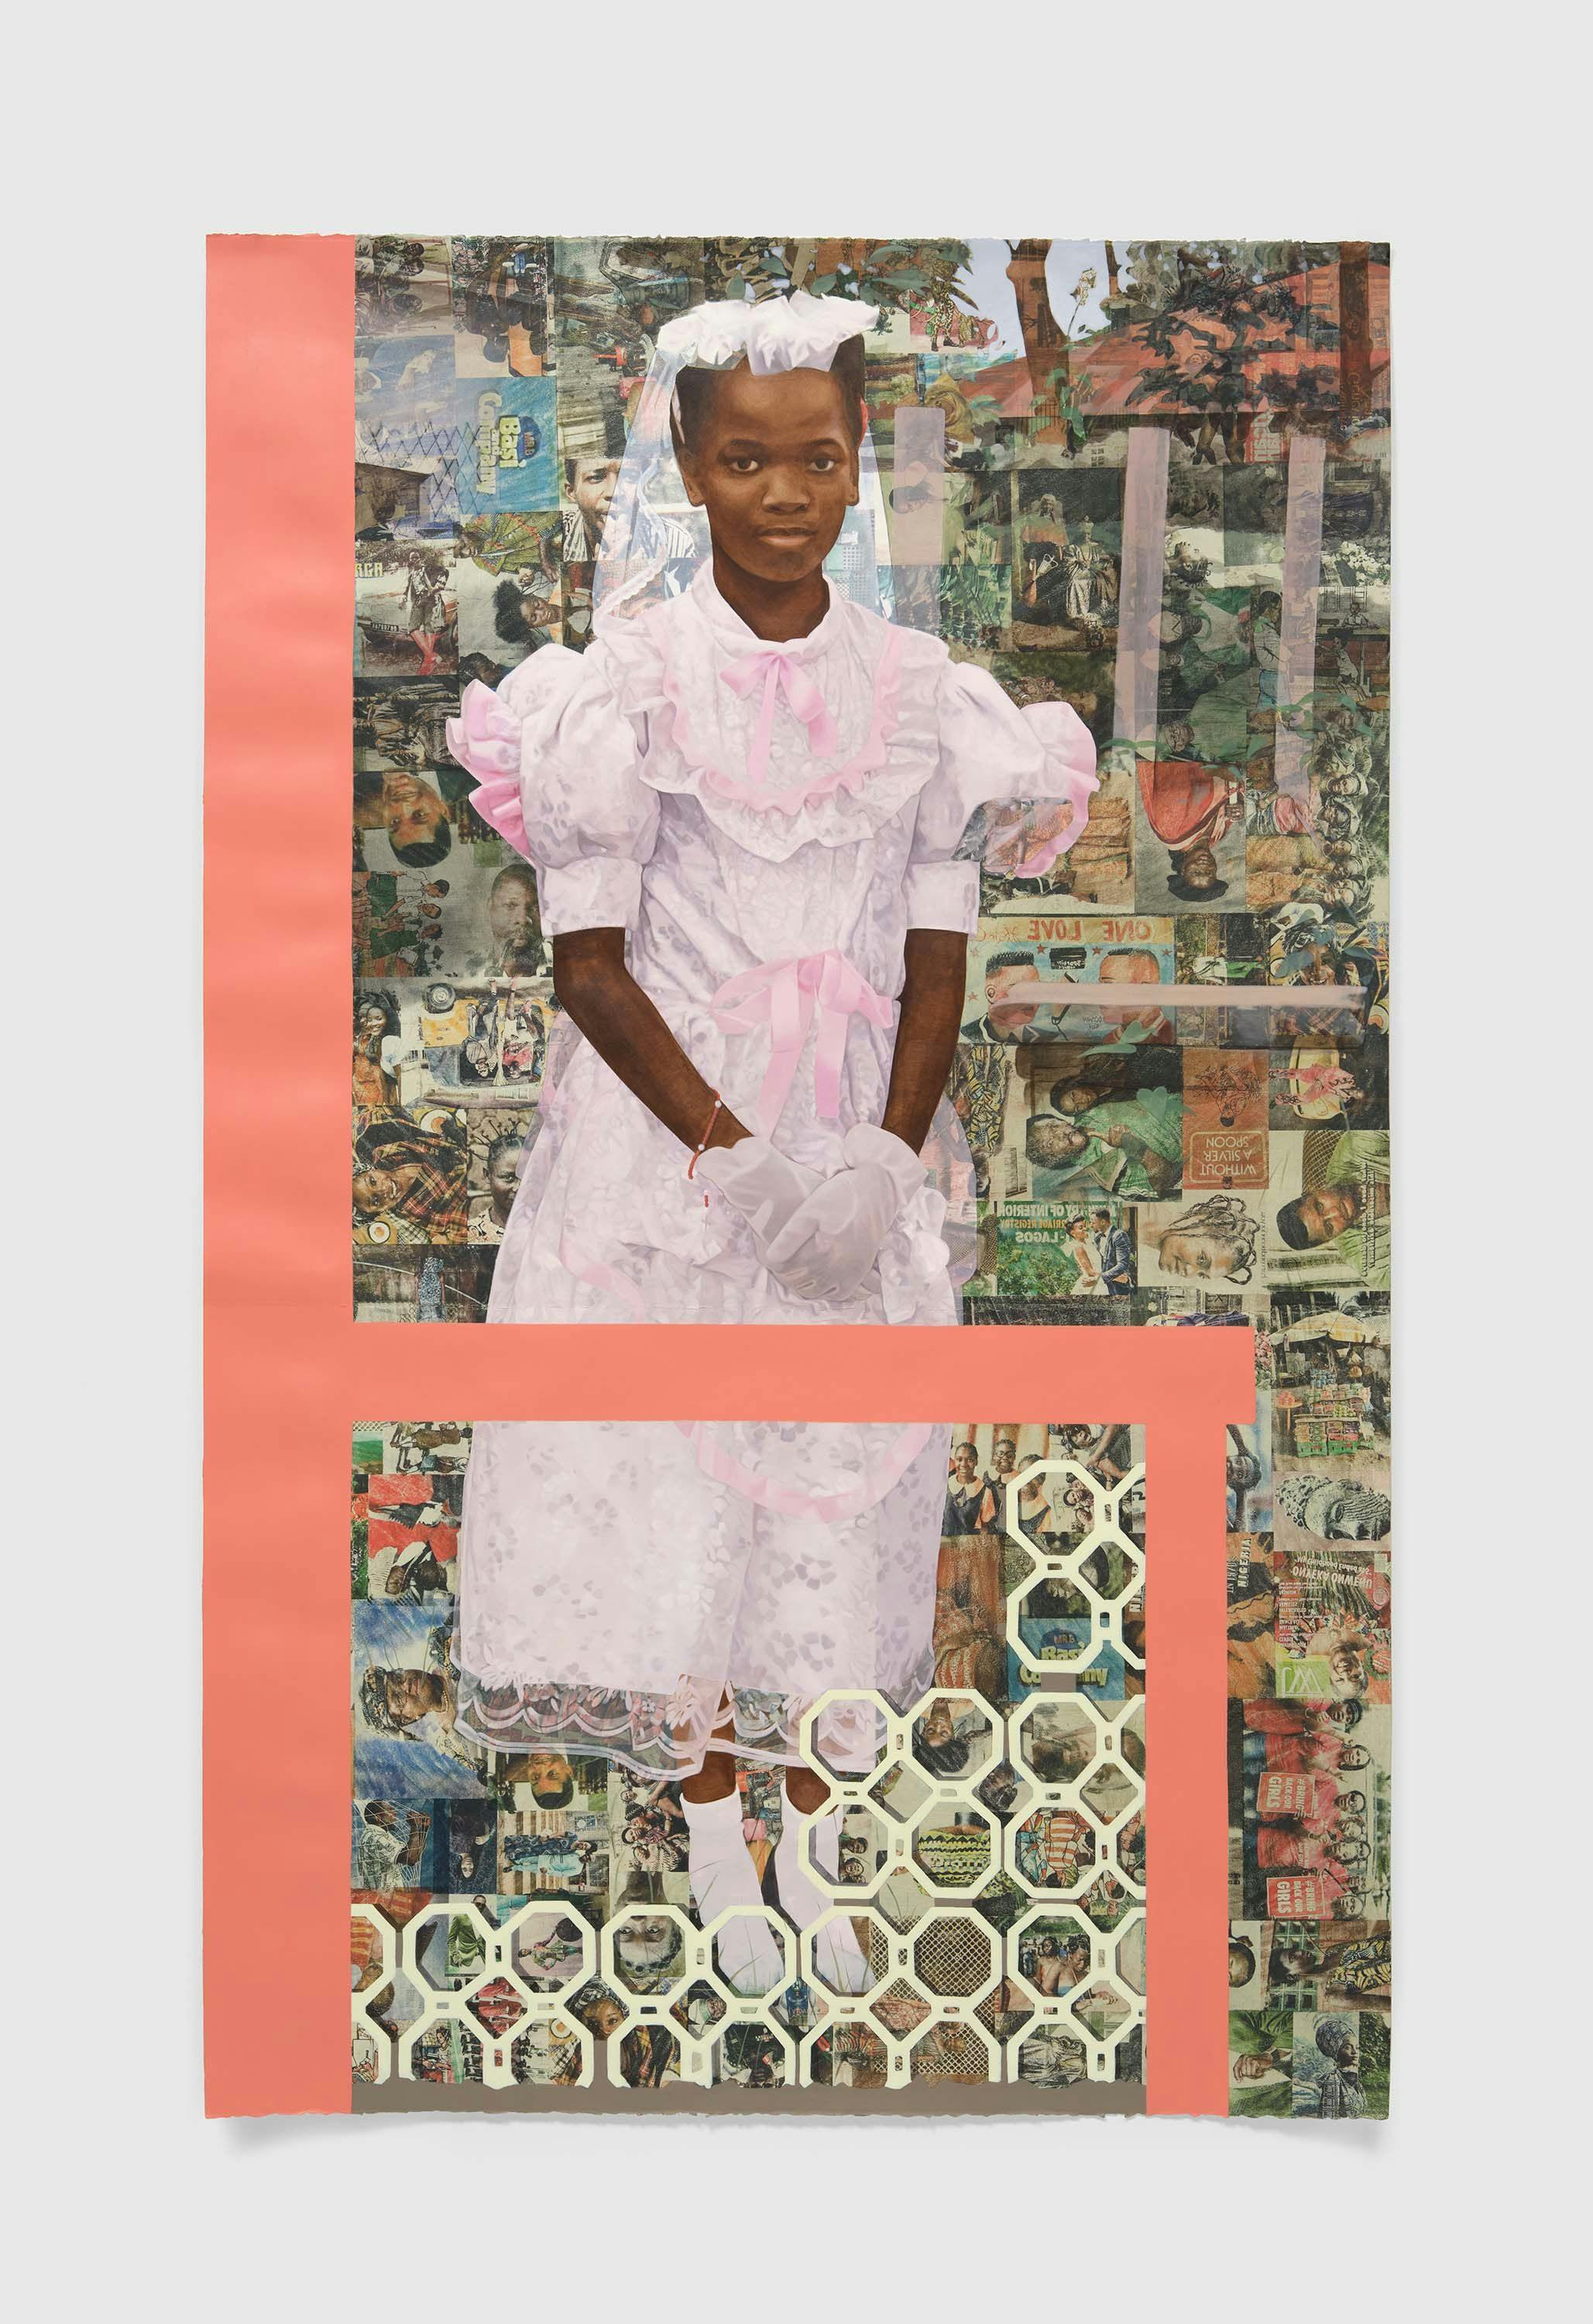 A work on paper by Njideka Akunyili Crosby, titled "The Beautyful Ones" Series #11, dated 2023.